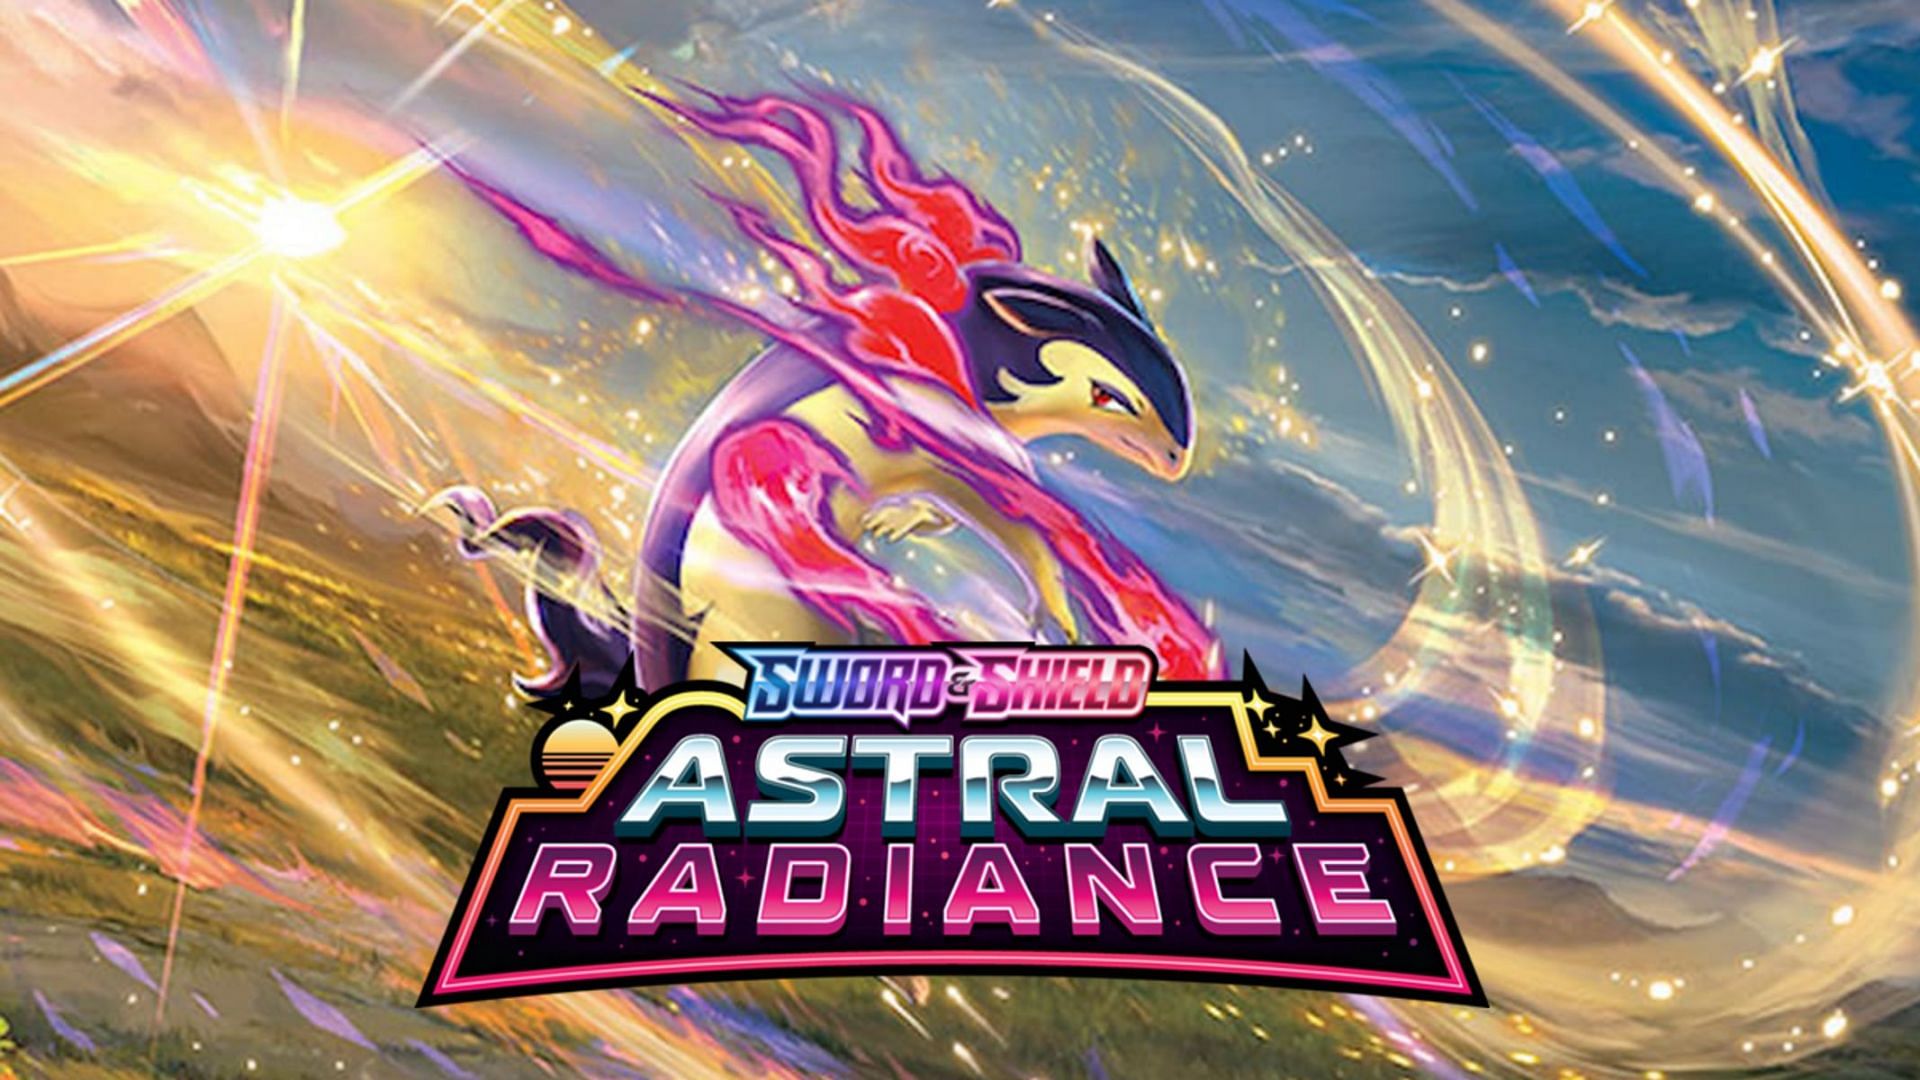 The Astral Radiance set will be released in May and will feature cards from the Hisui region (Image via The Pokemon Company)